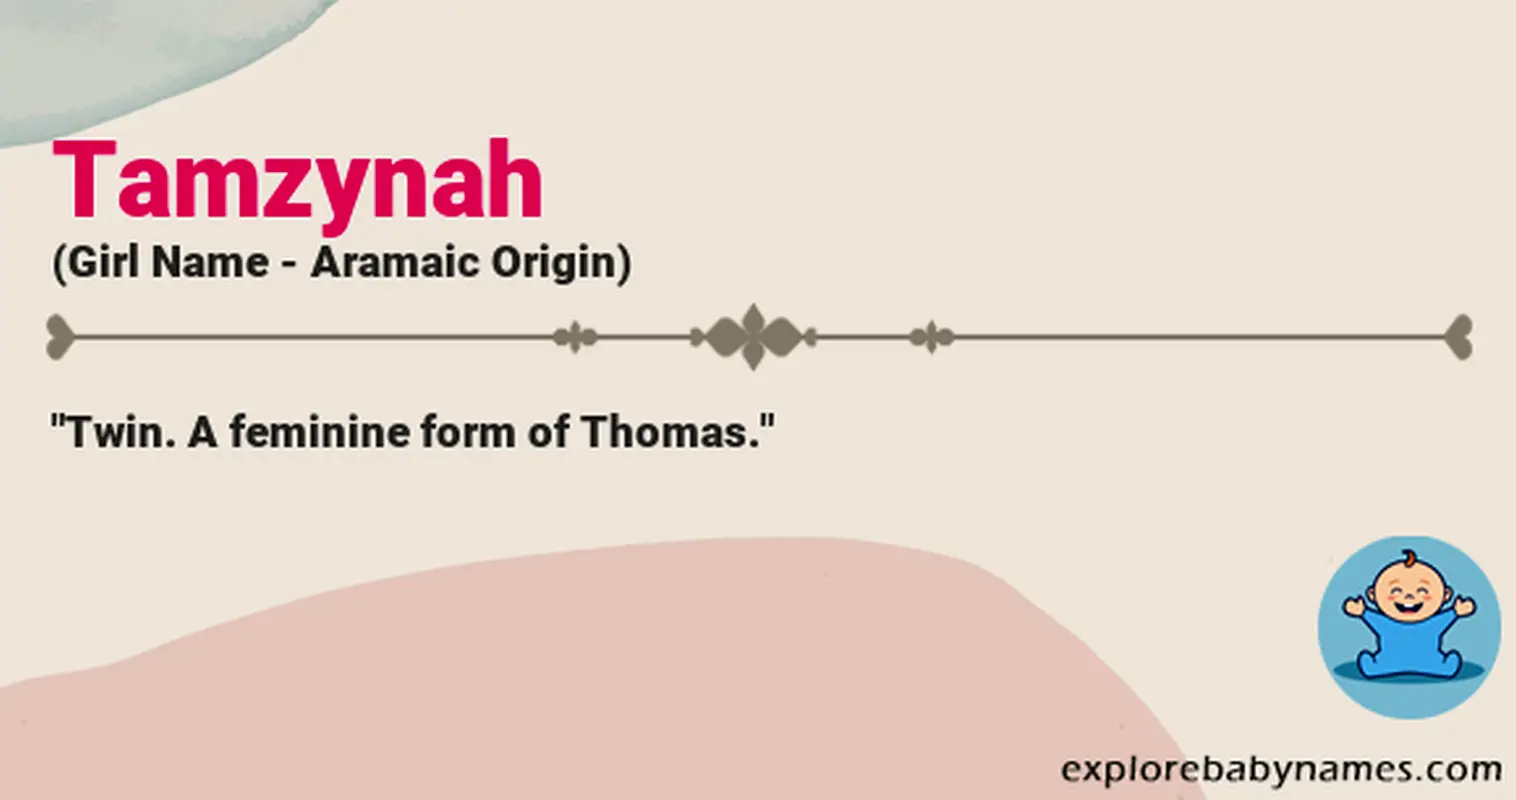 Meaning of Tamzynah